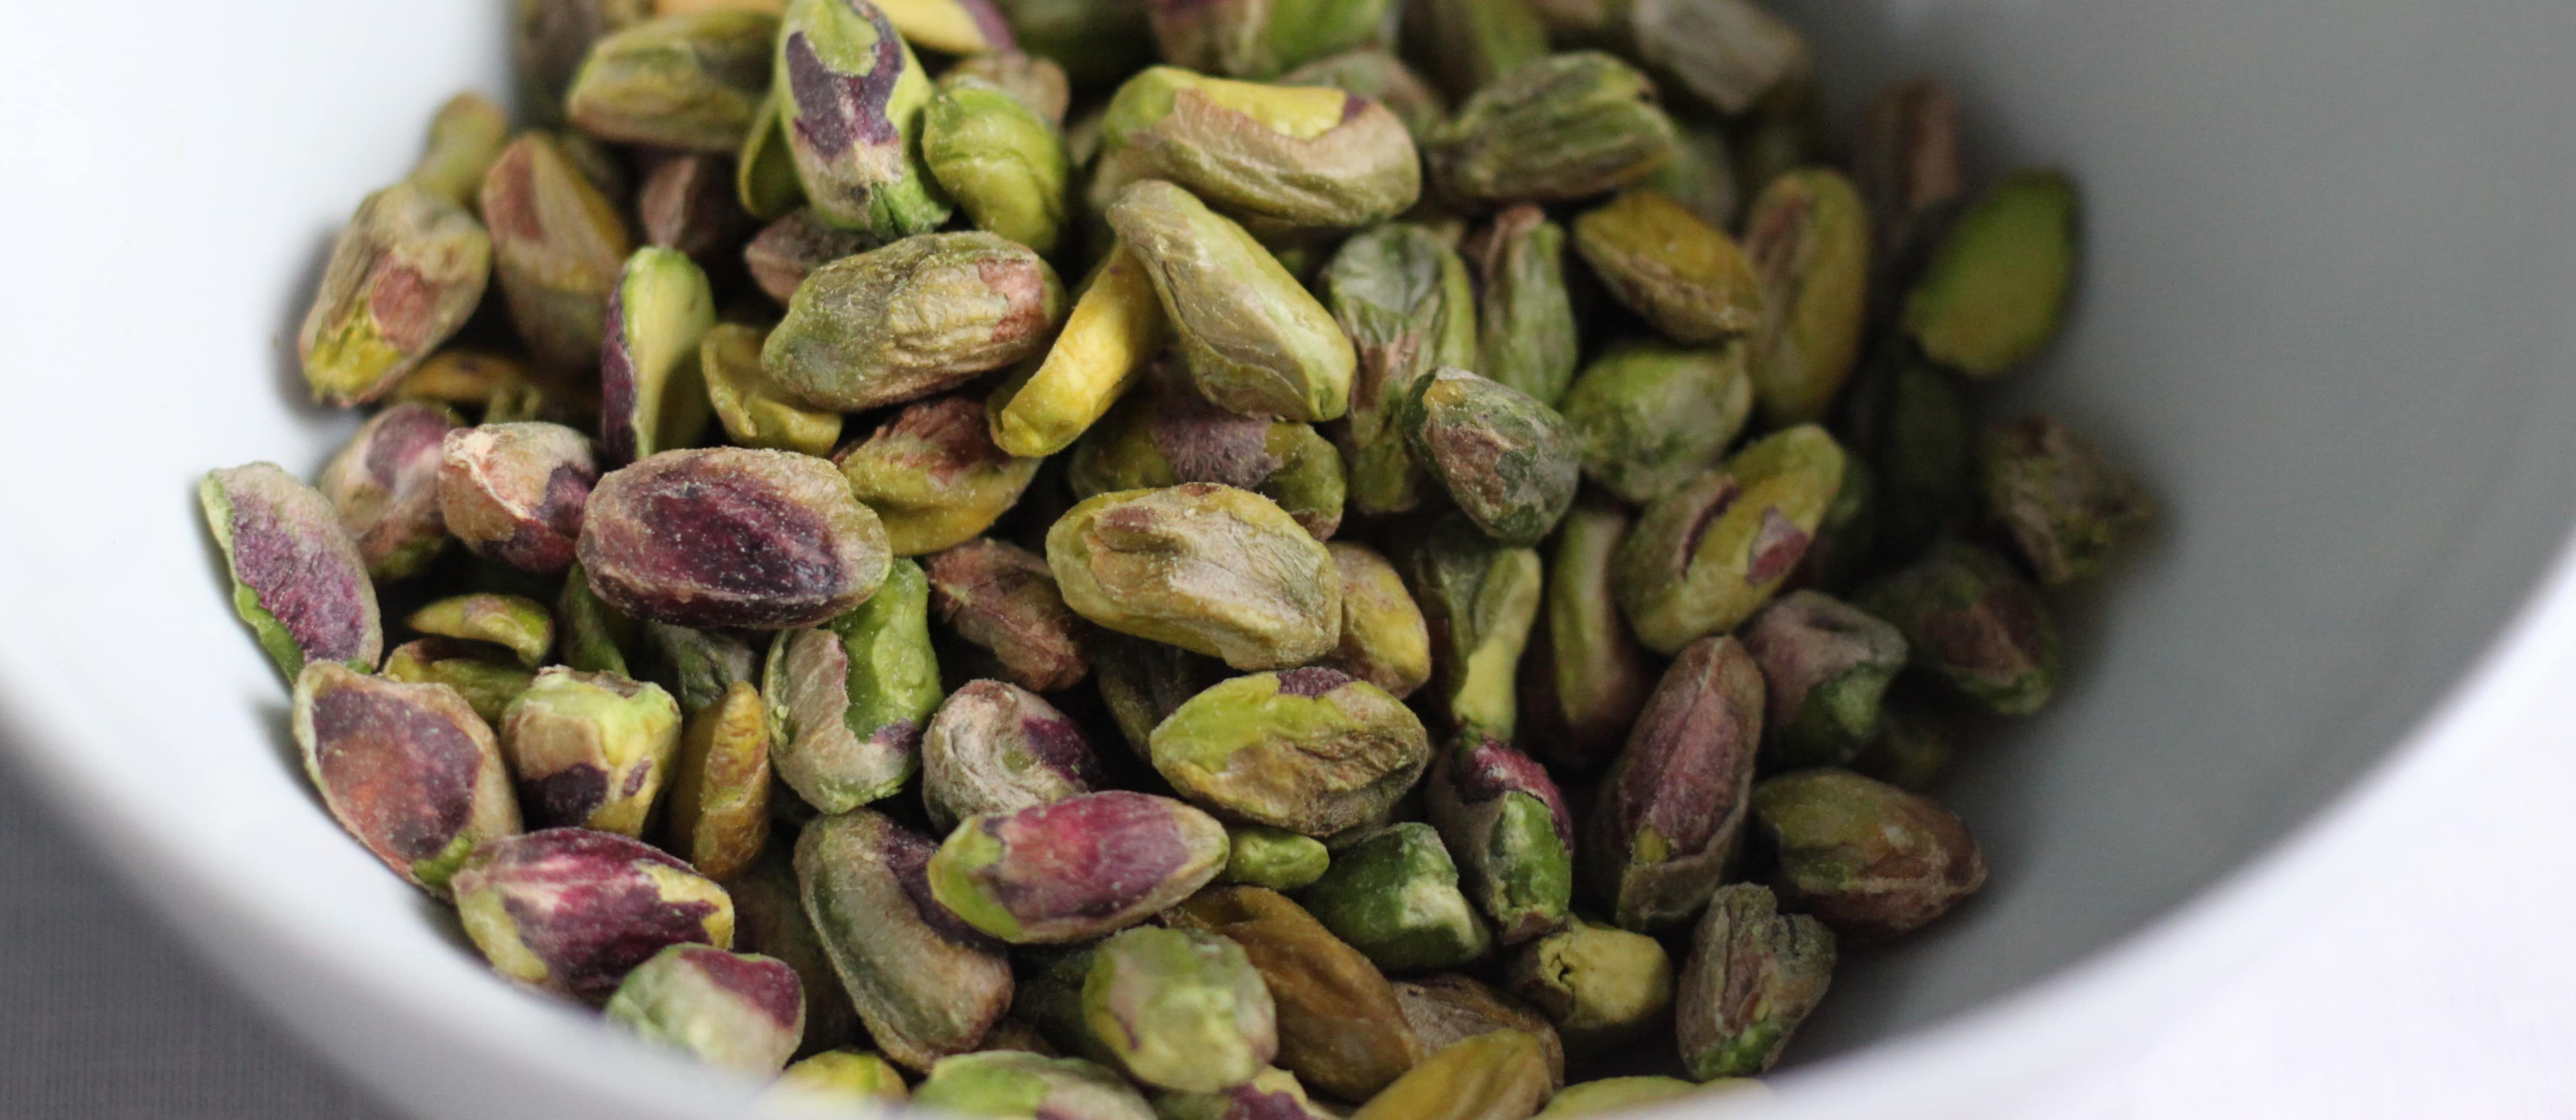 Pistachios May Help Erectile Dysfunction | NutritionFacts.org